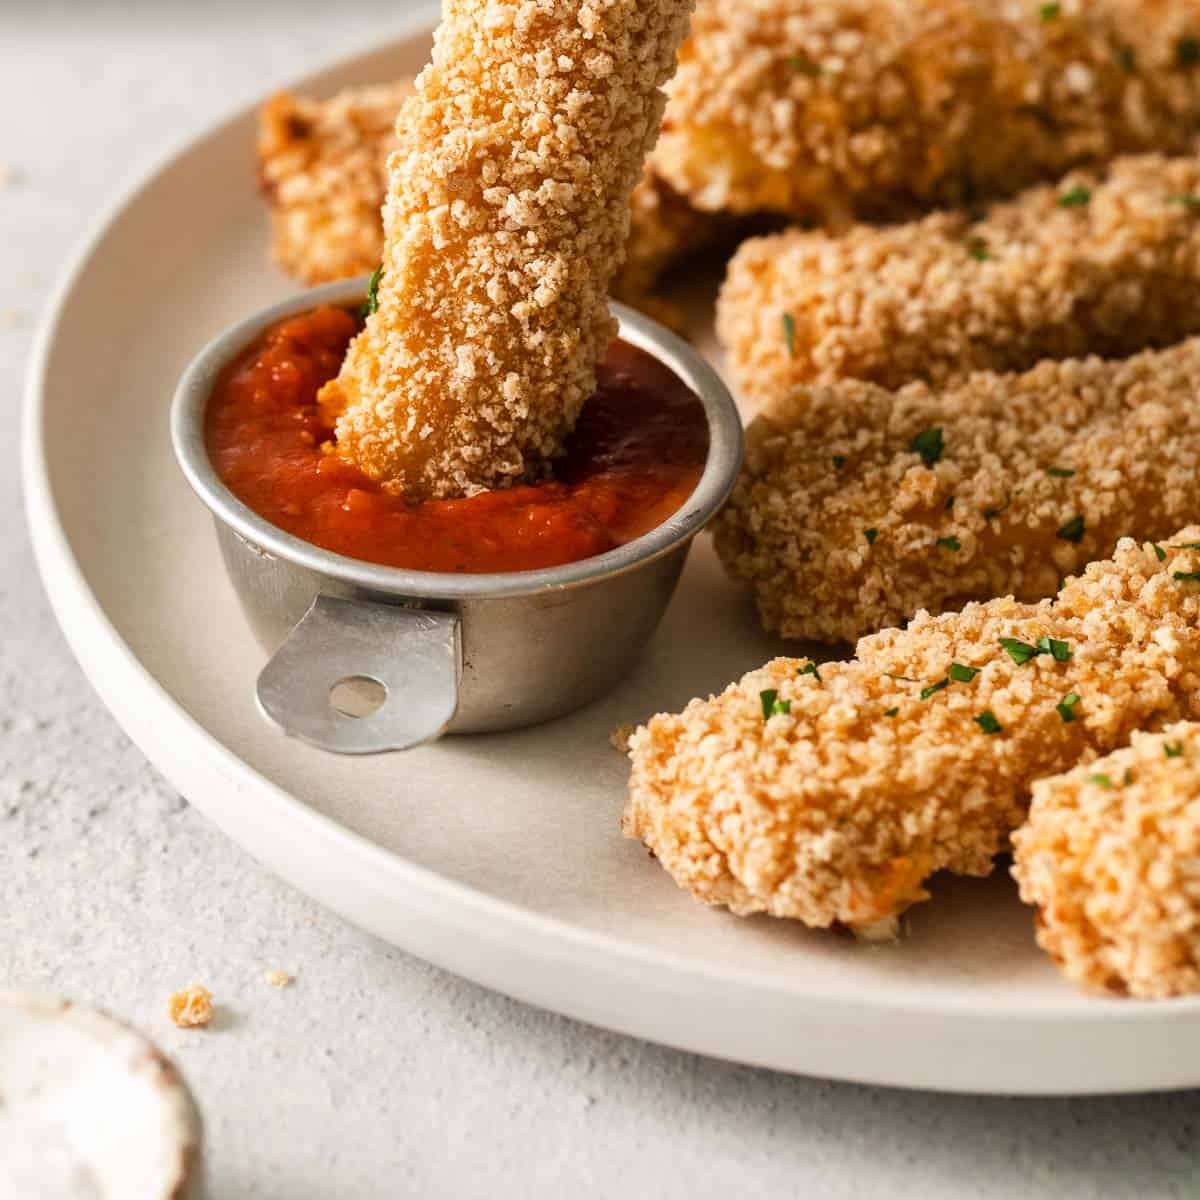 Fried bread sticks with sauce on a plate.